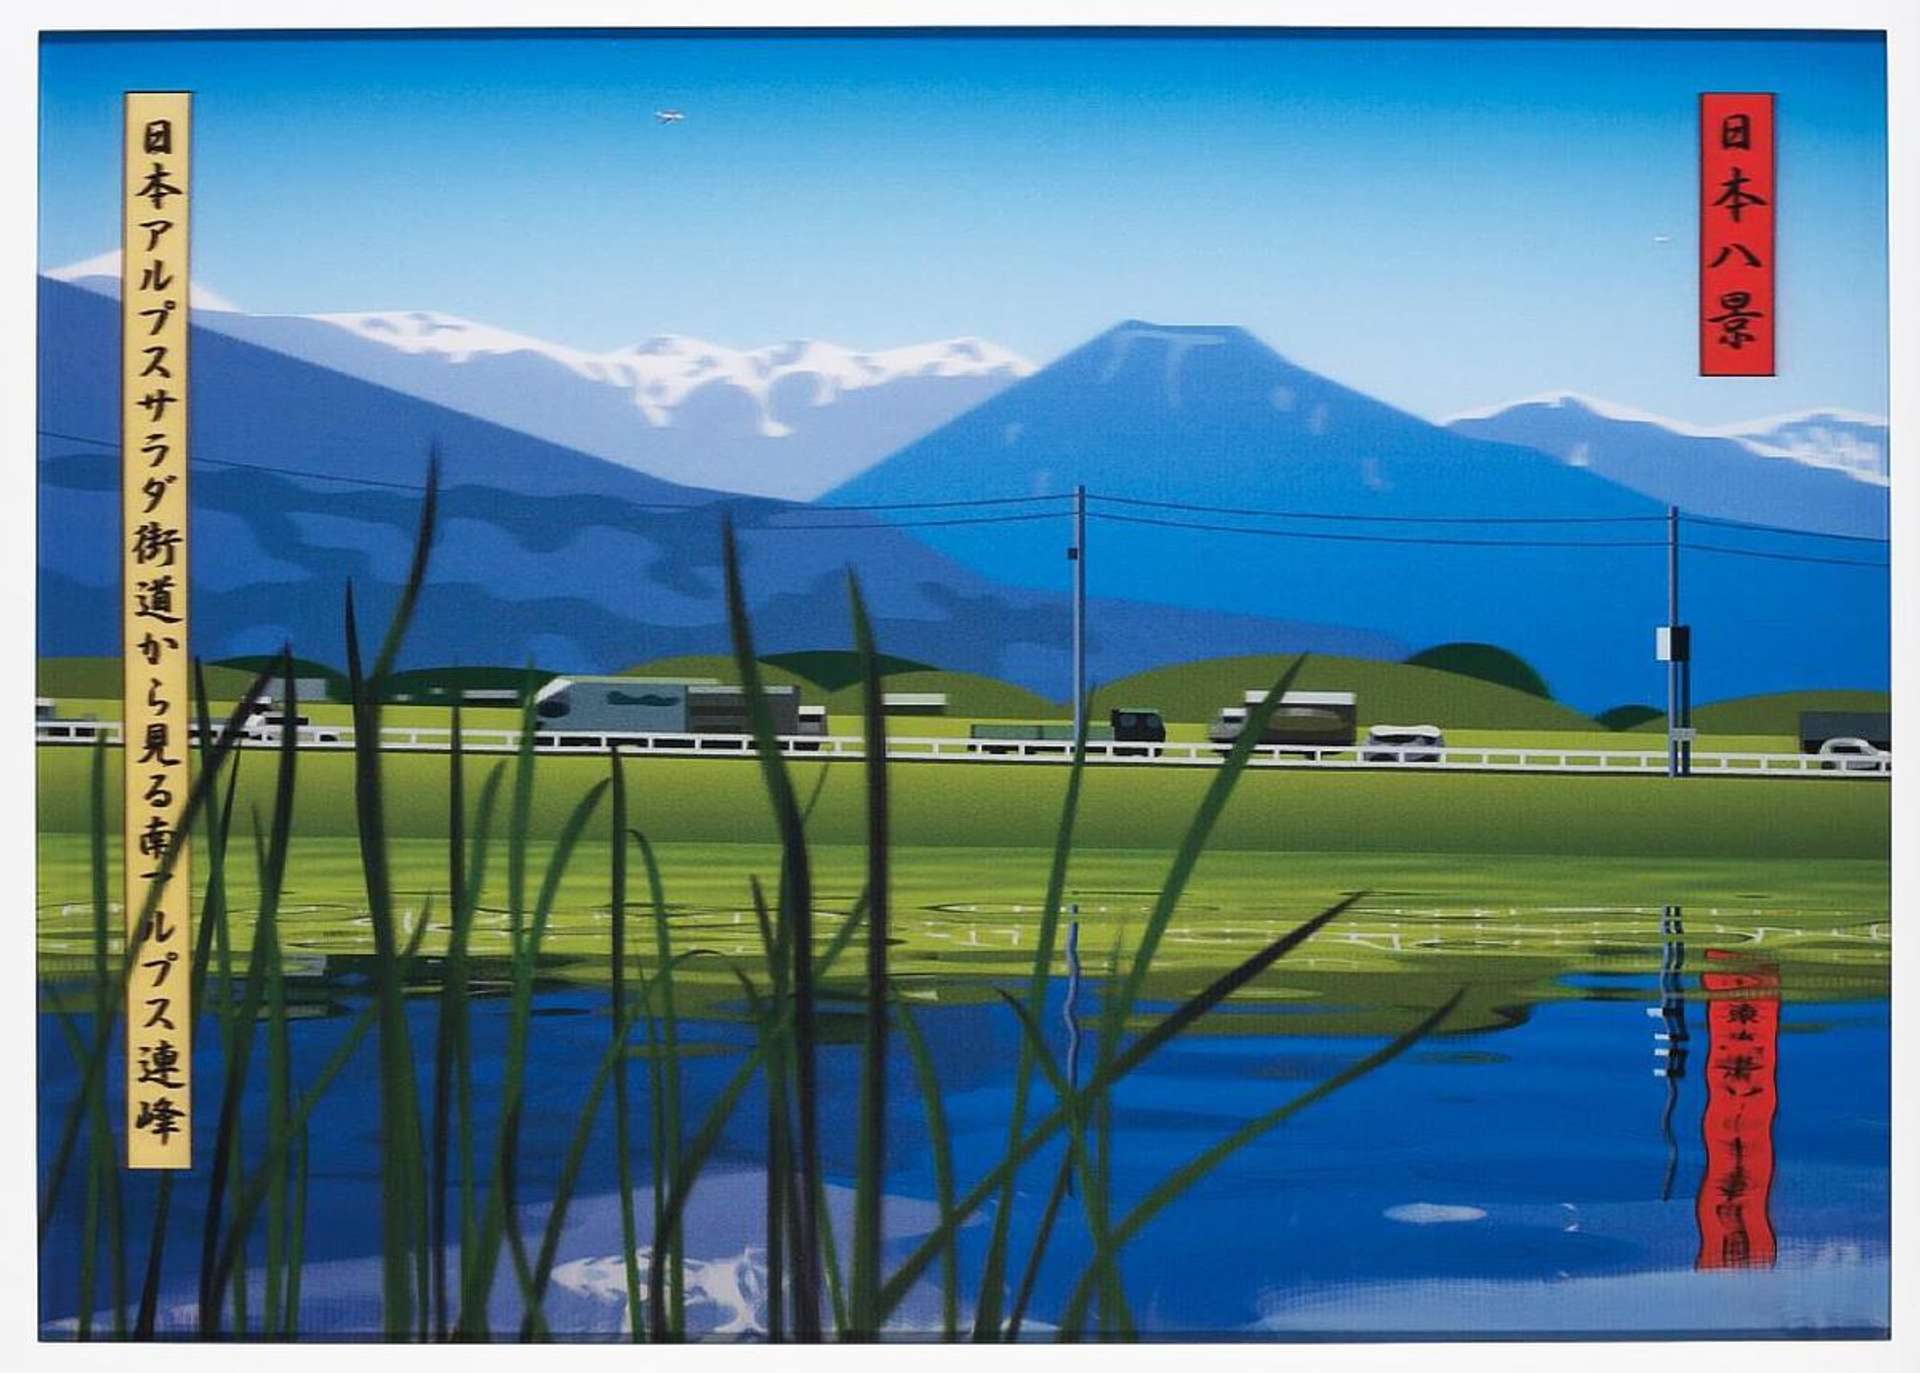 View of the Mountains from the Nihon Alps Salada Road by Julian Opie